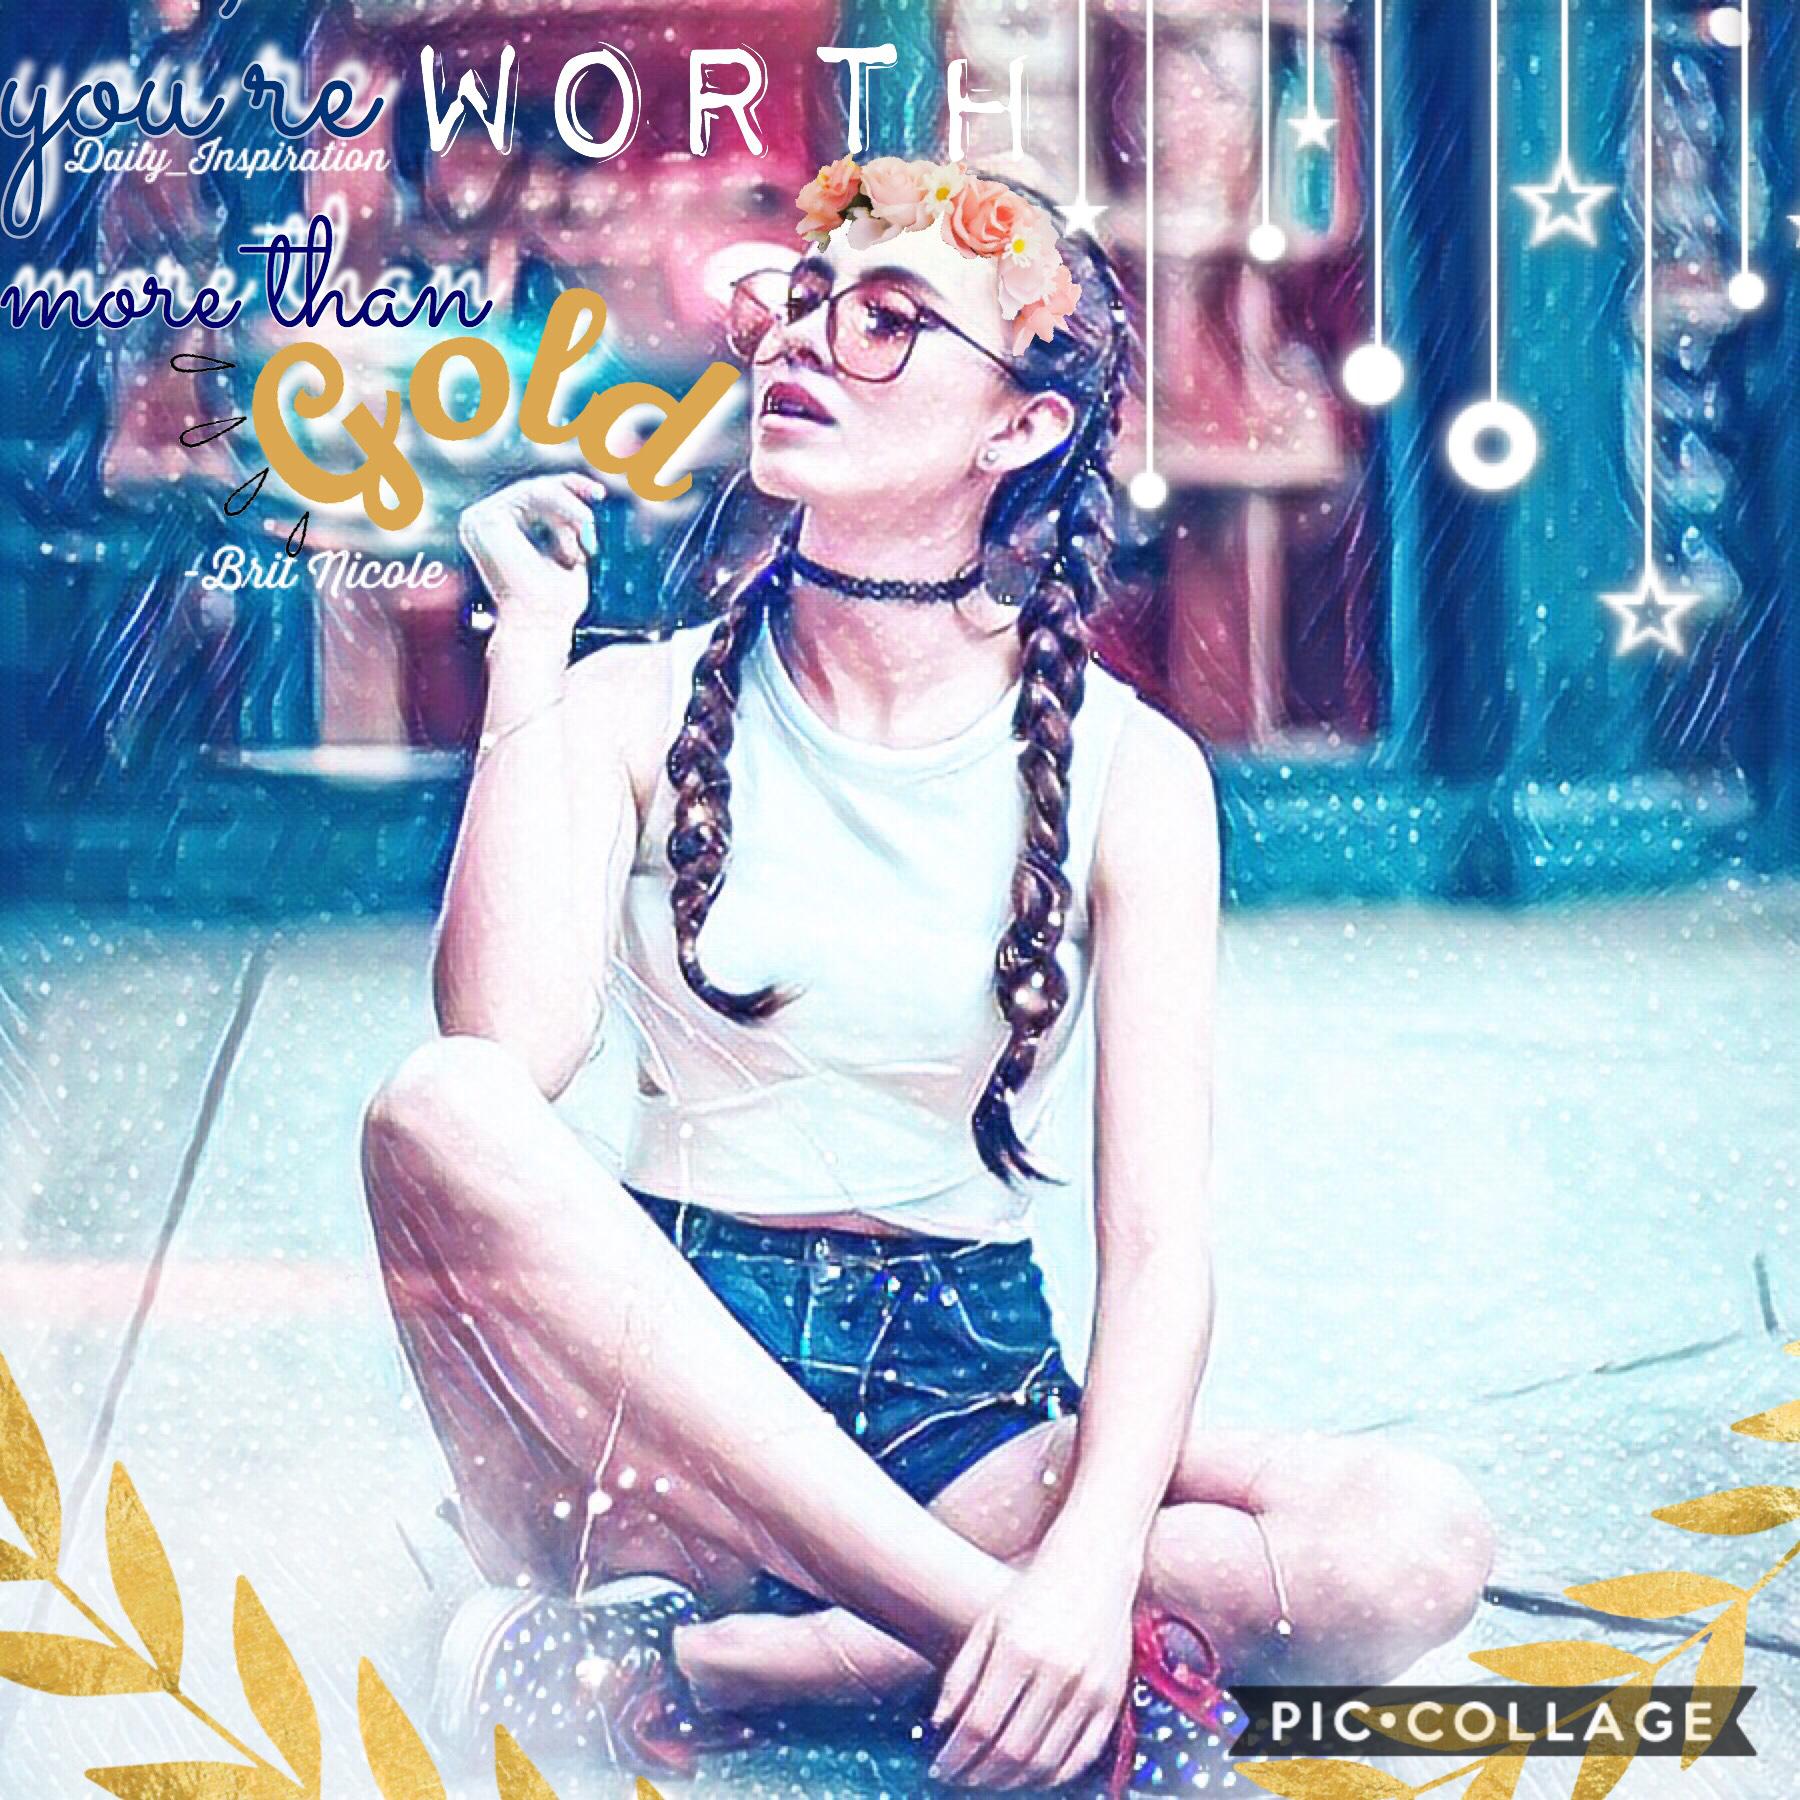 ✨tap✨
this is an entry to @Leila101’s (I hope I spelled that right) kindness contest. You are worth more than gold!❤️
QOTD:🍁or🌻
AOTD:🌻
8/30/2018